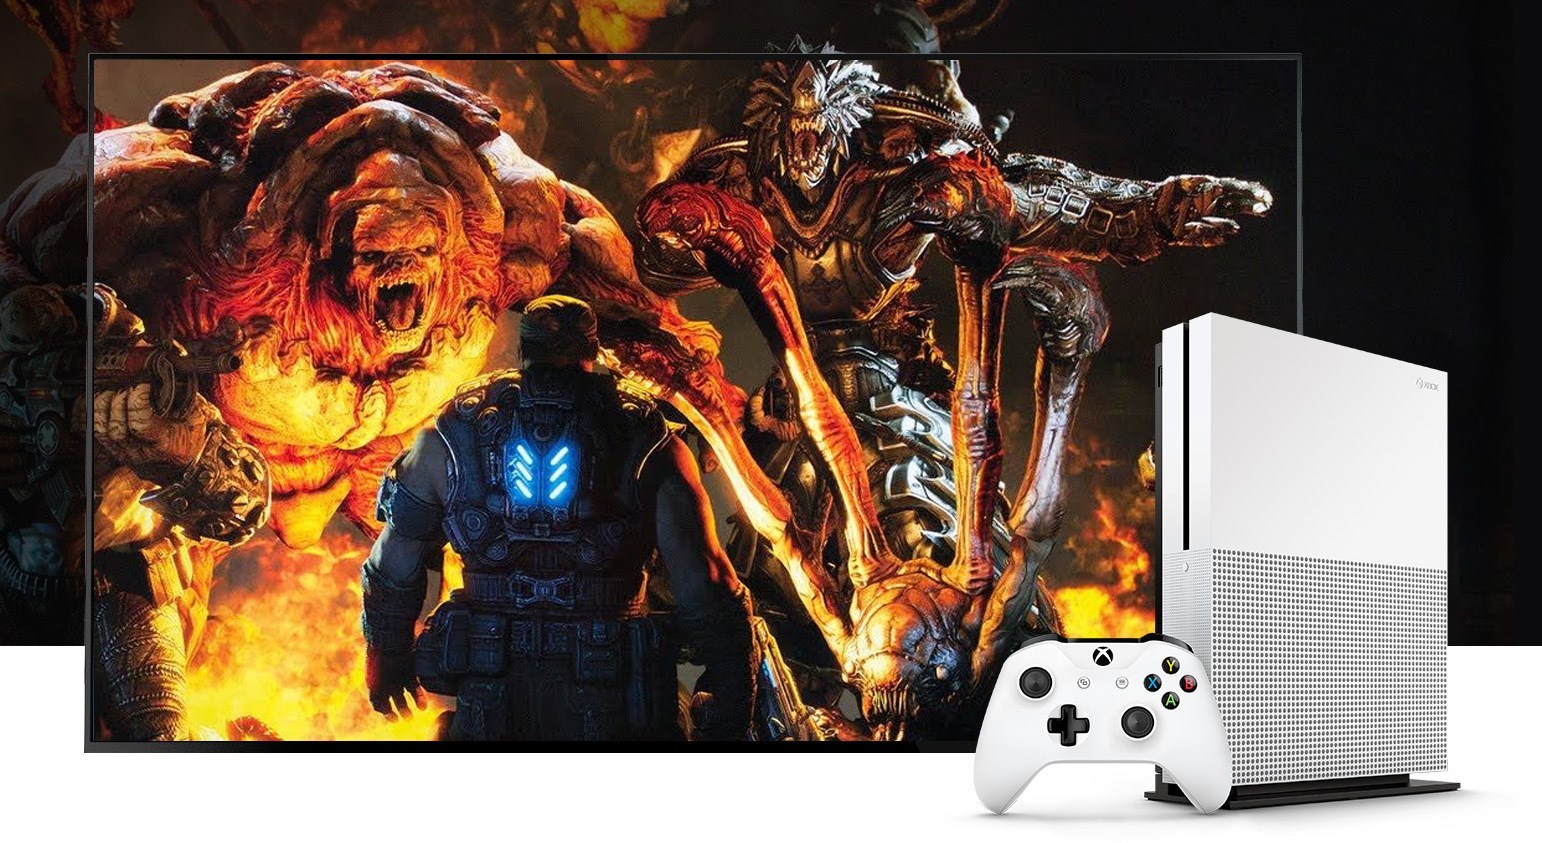 An Xbox One S, with Xbox One exclusive game Gears of War 4.